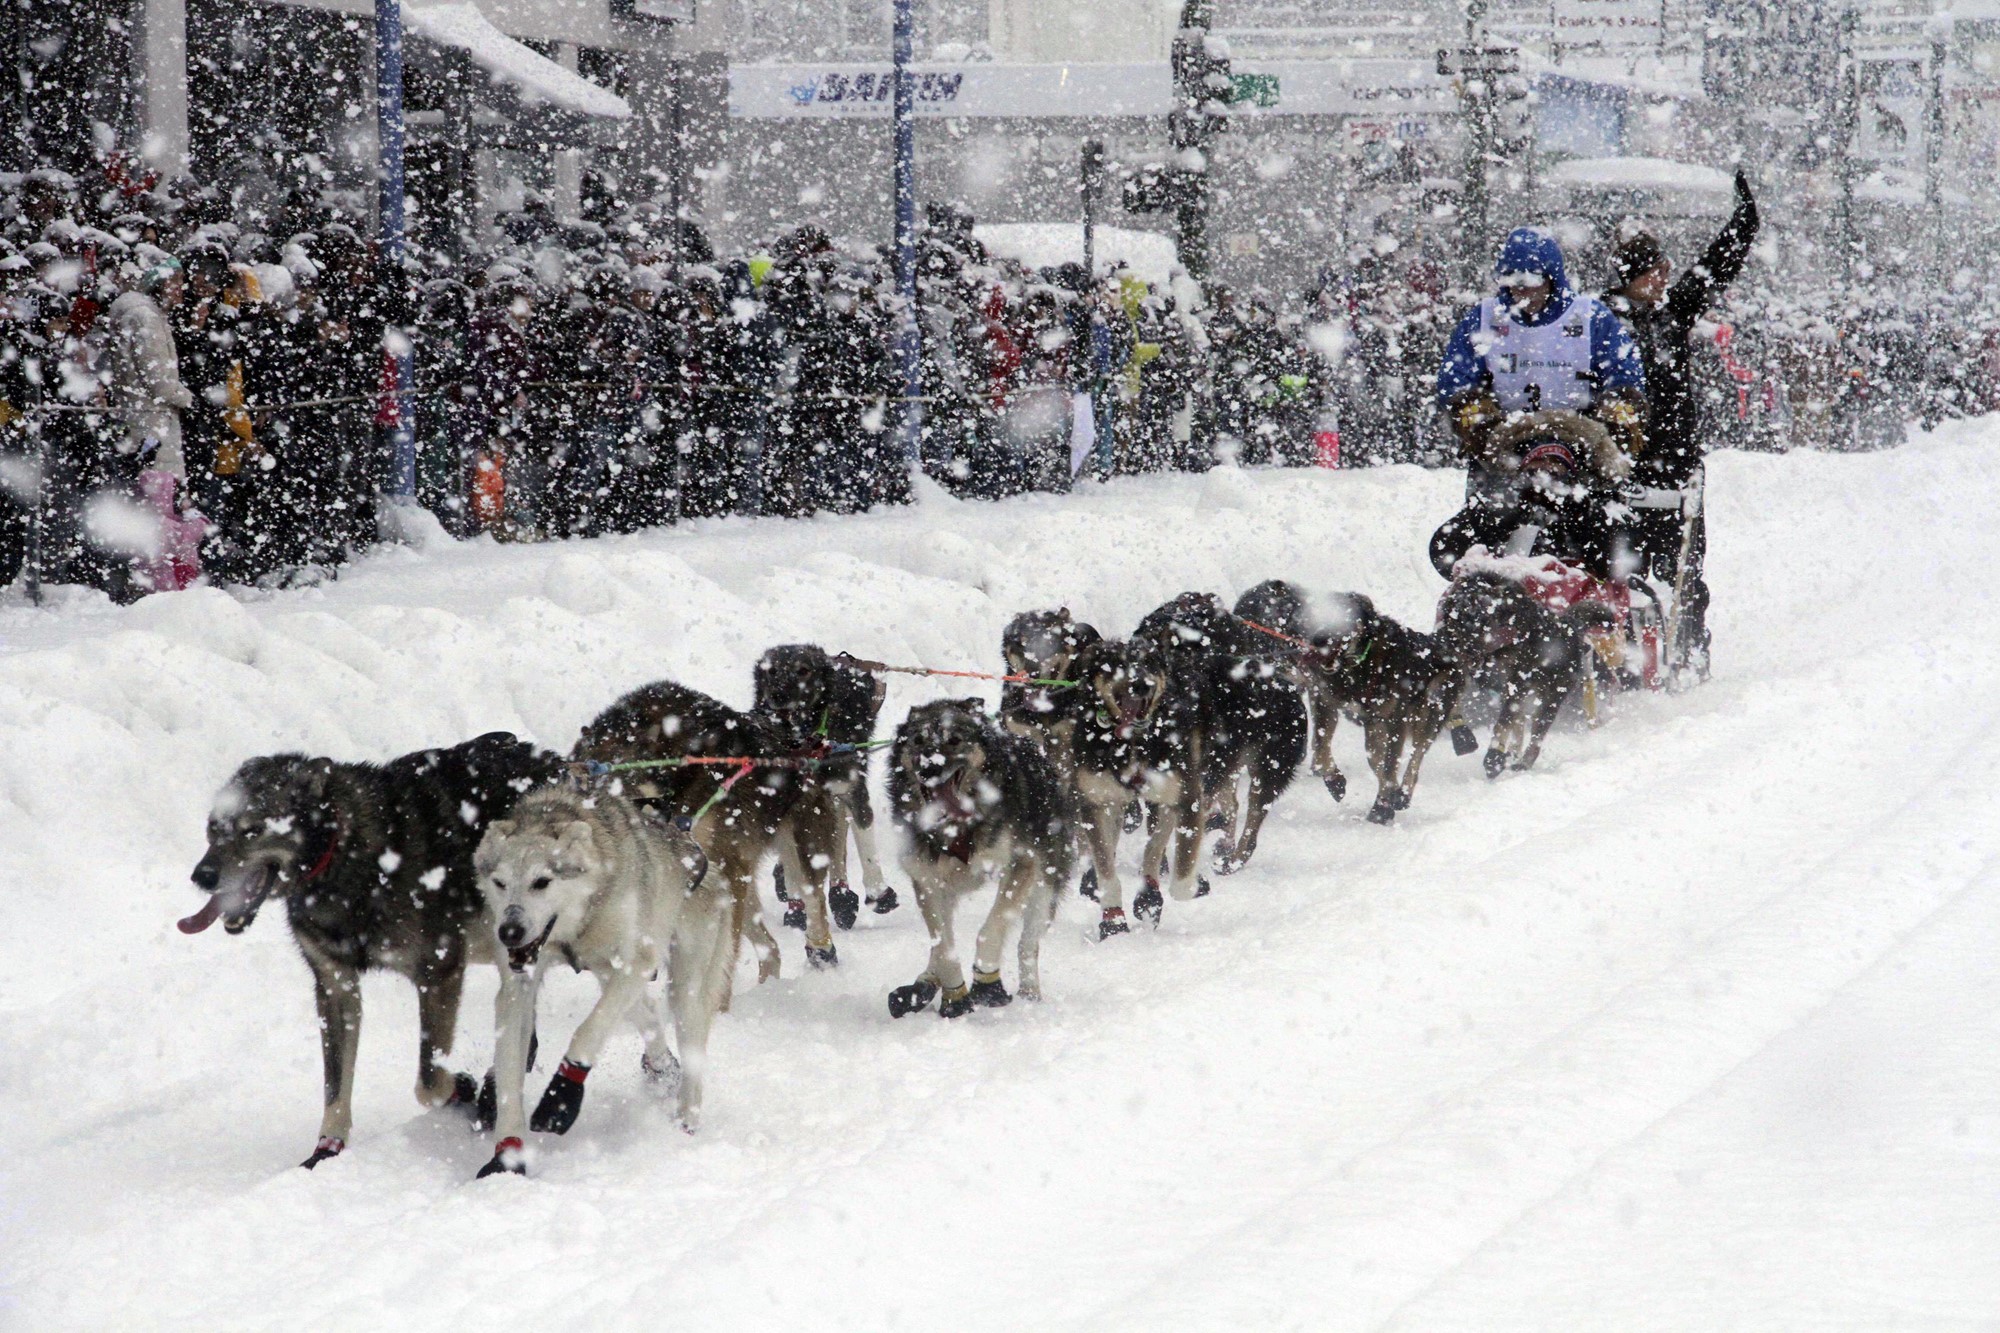 A team of sled dogs push through heavy snow as crowds watch from the side.